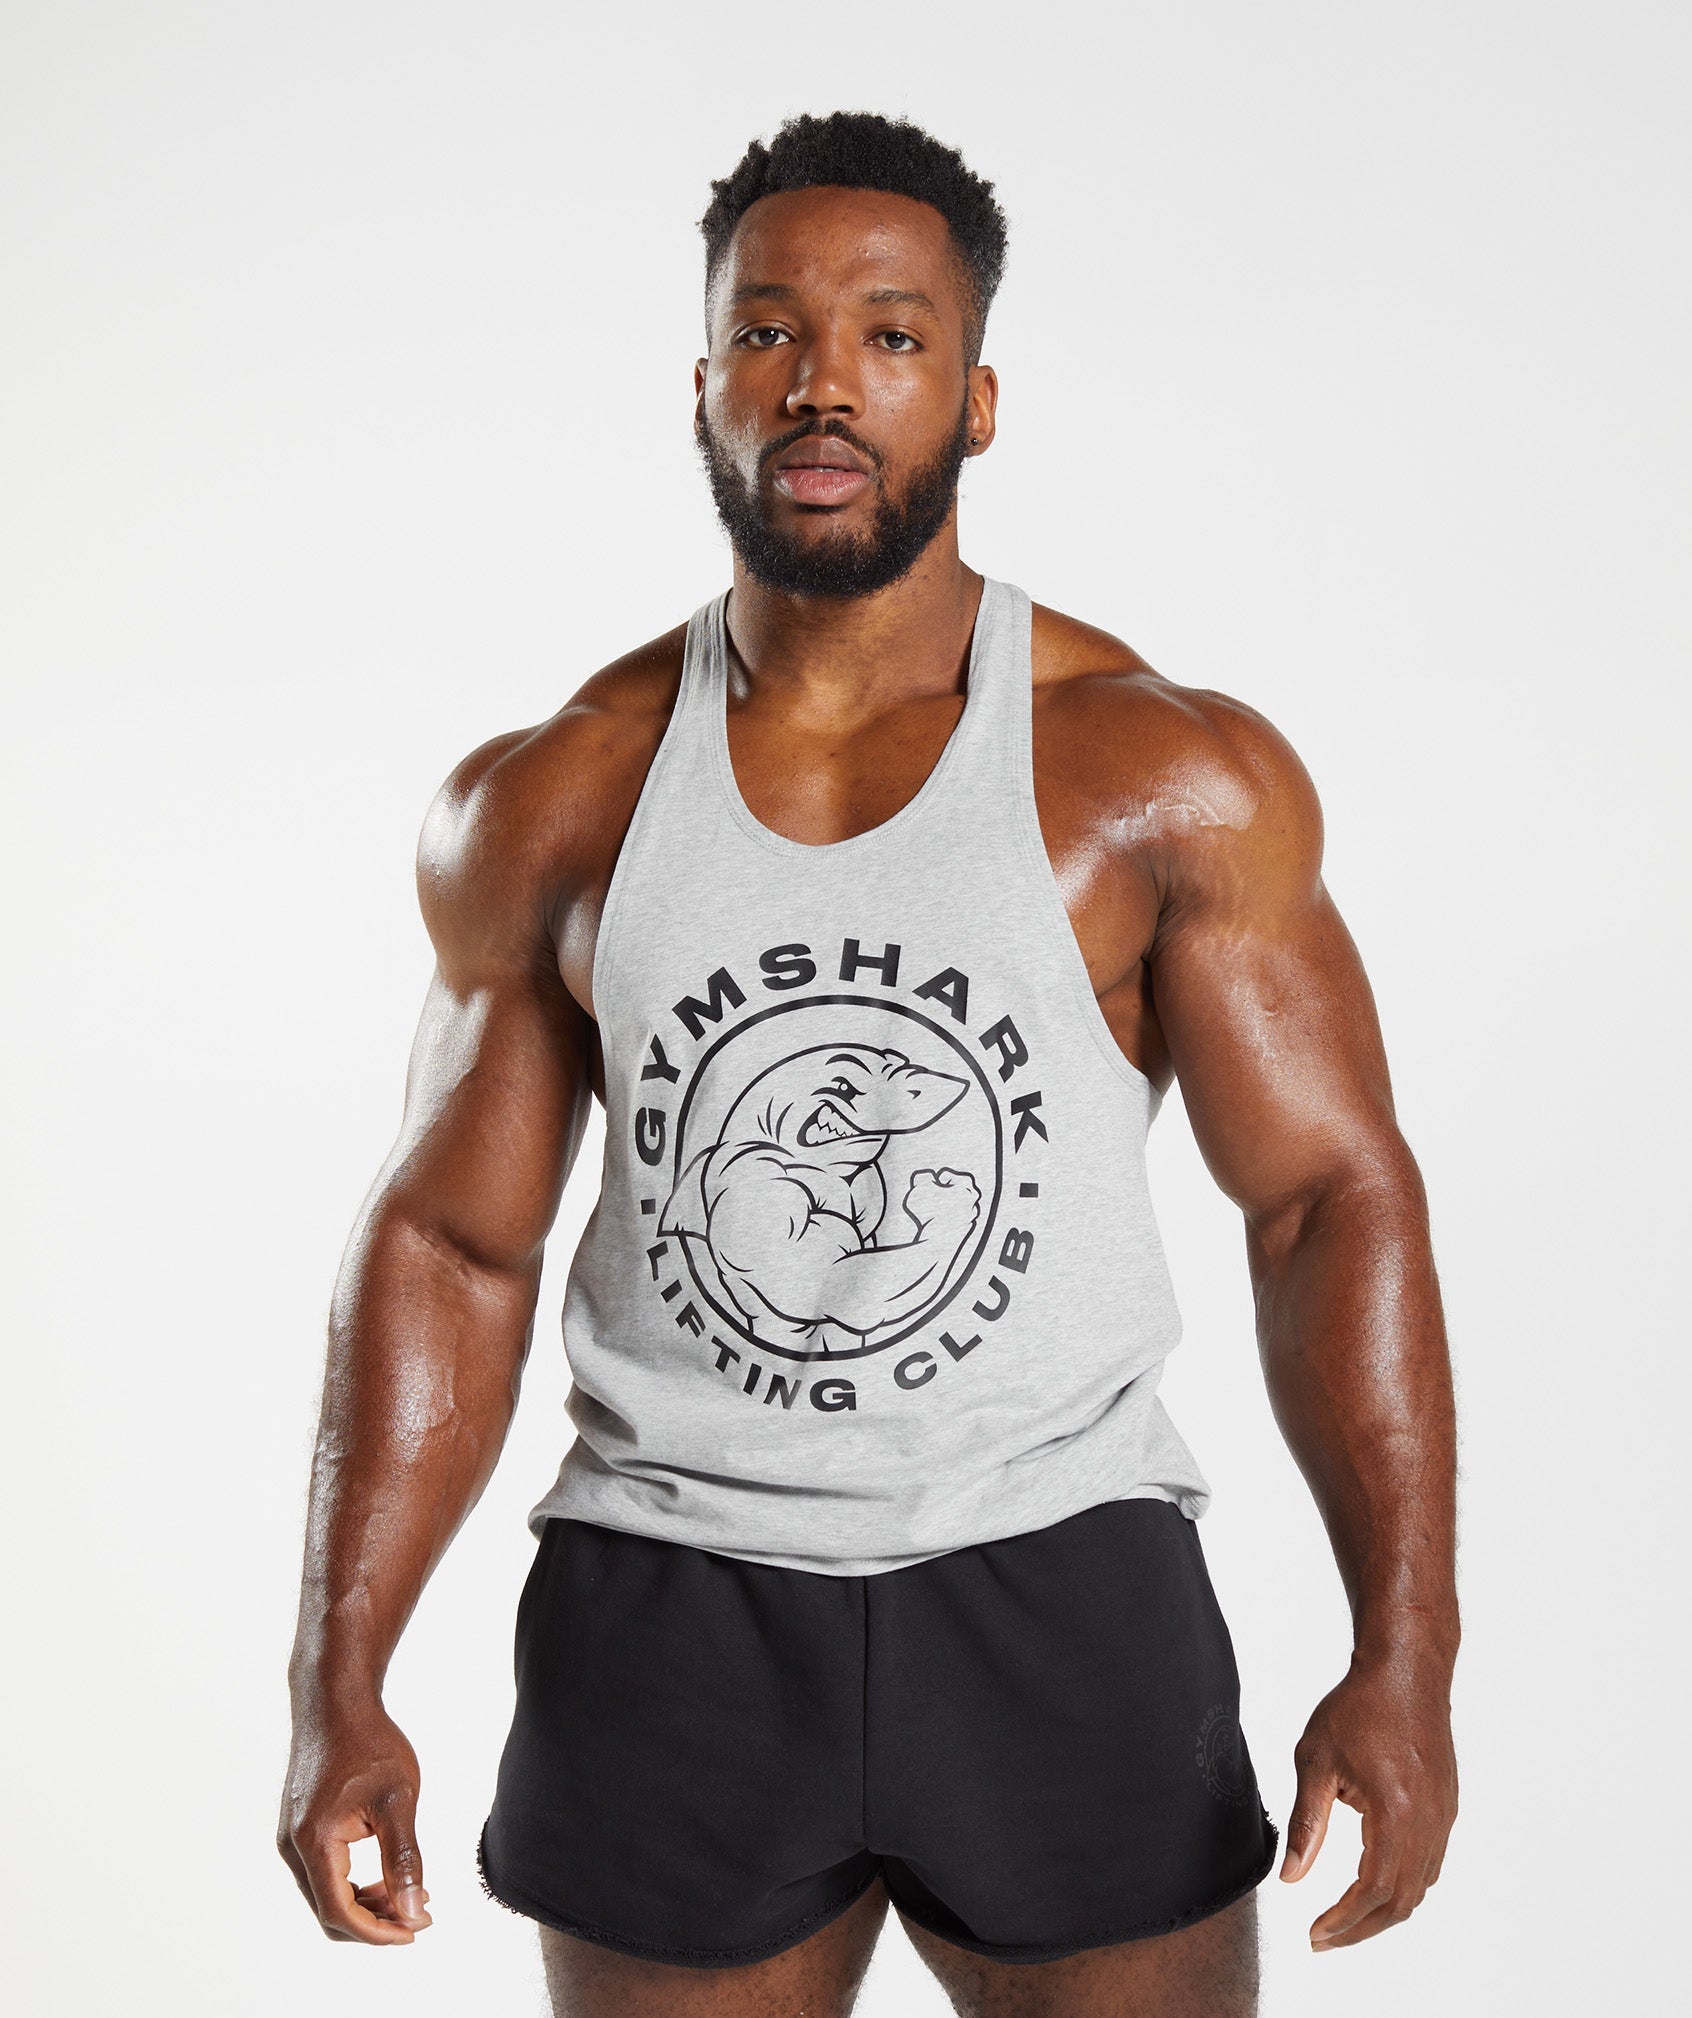 Stringers - Gymshark Products For Sale - Mcvallescrivia